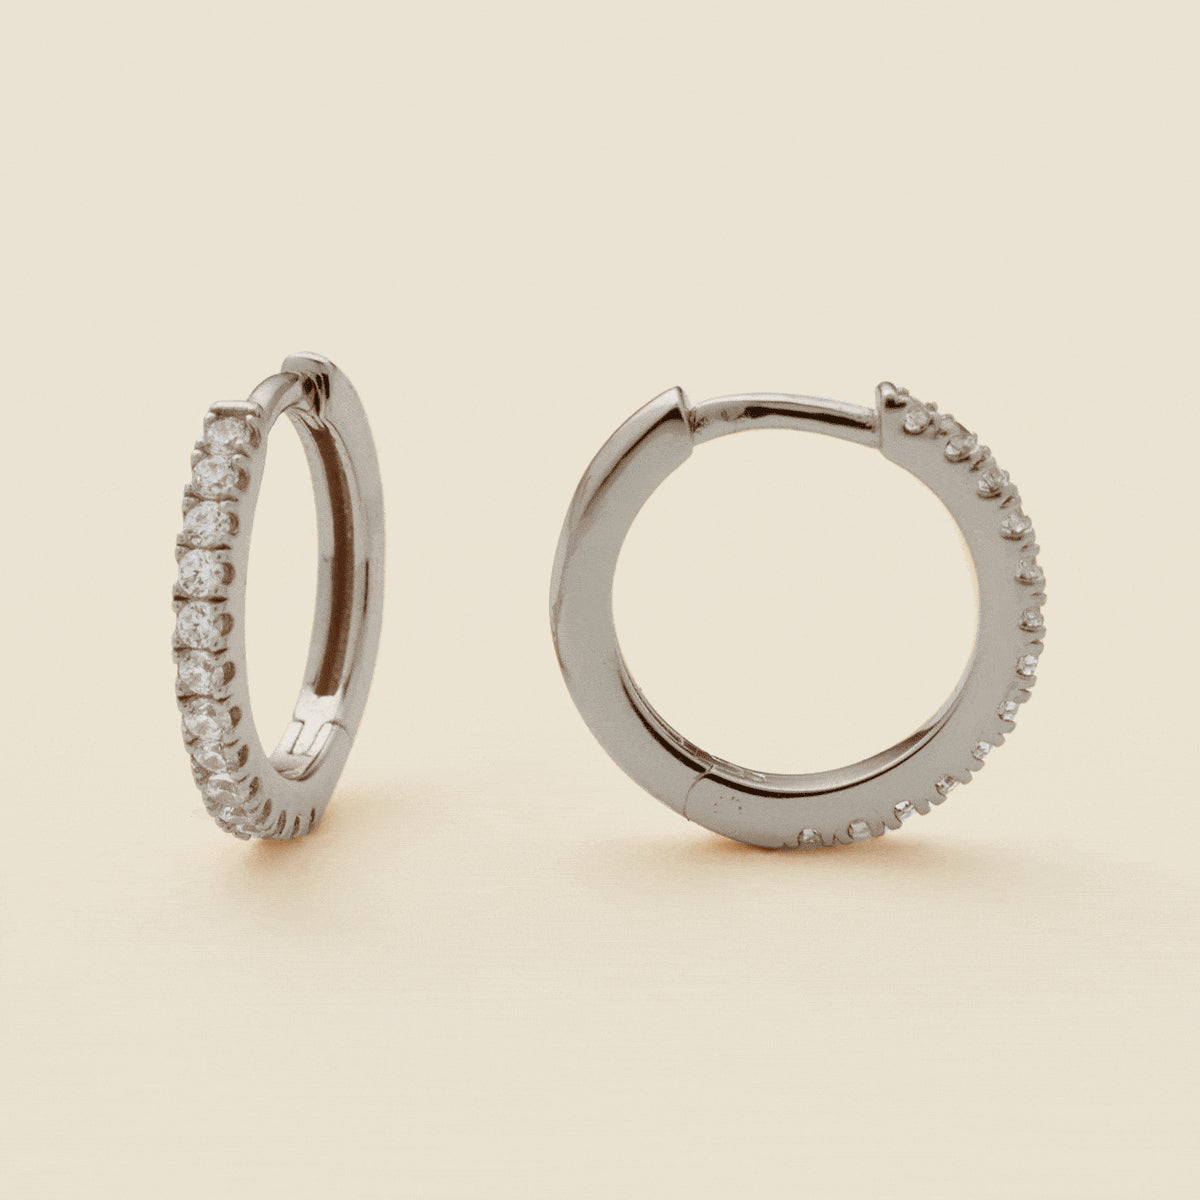 15mm Luxe Hoop & Stacking Band Set Jewelry Set